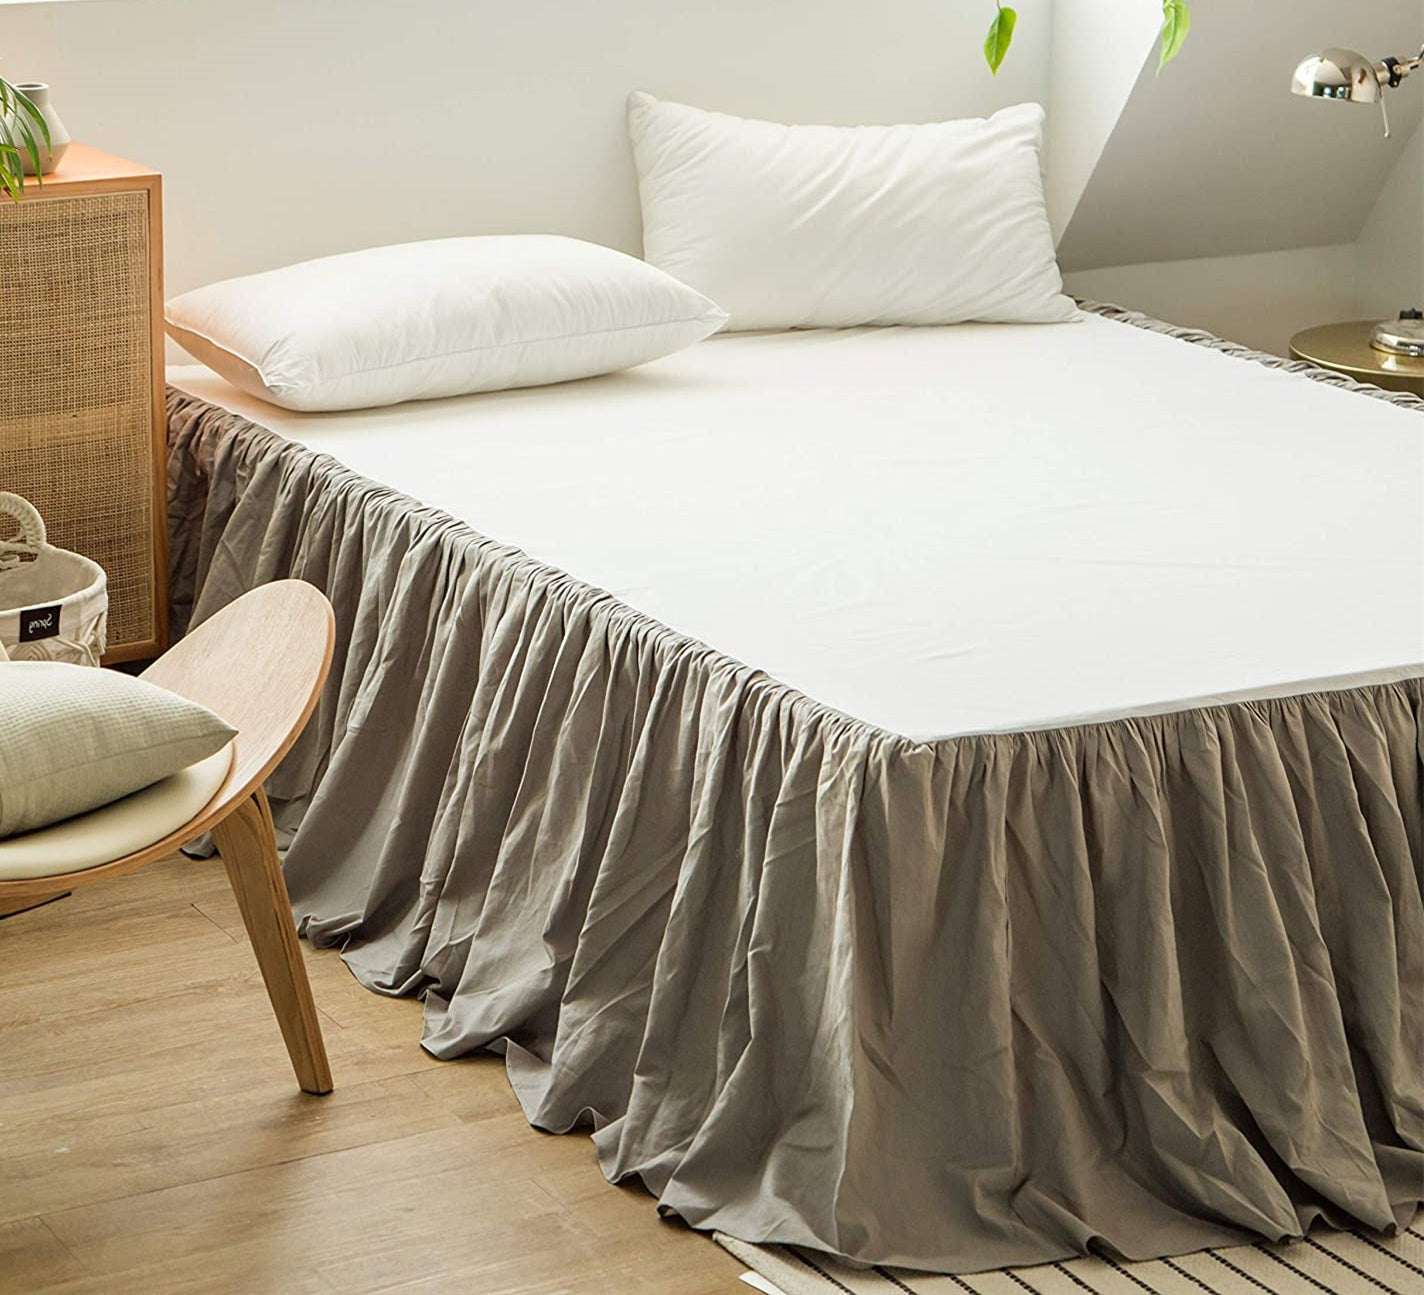 WONGS BEDDING Natural Flax Cotton French Linen Bed Skirt